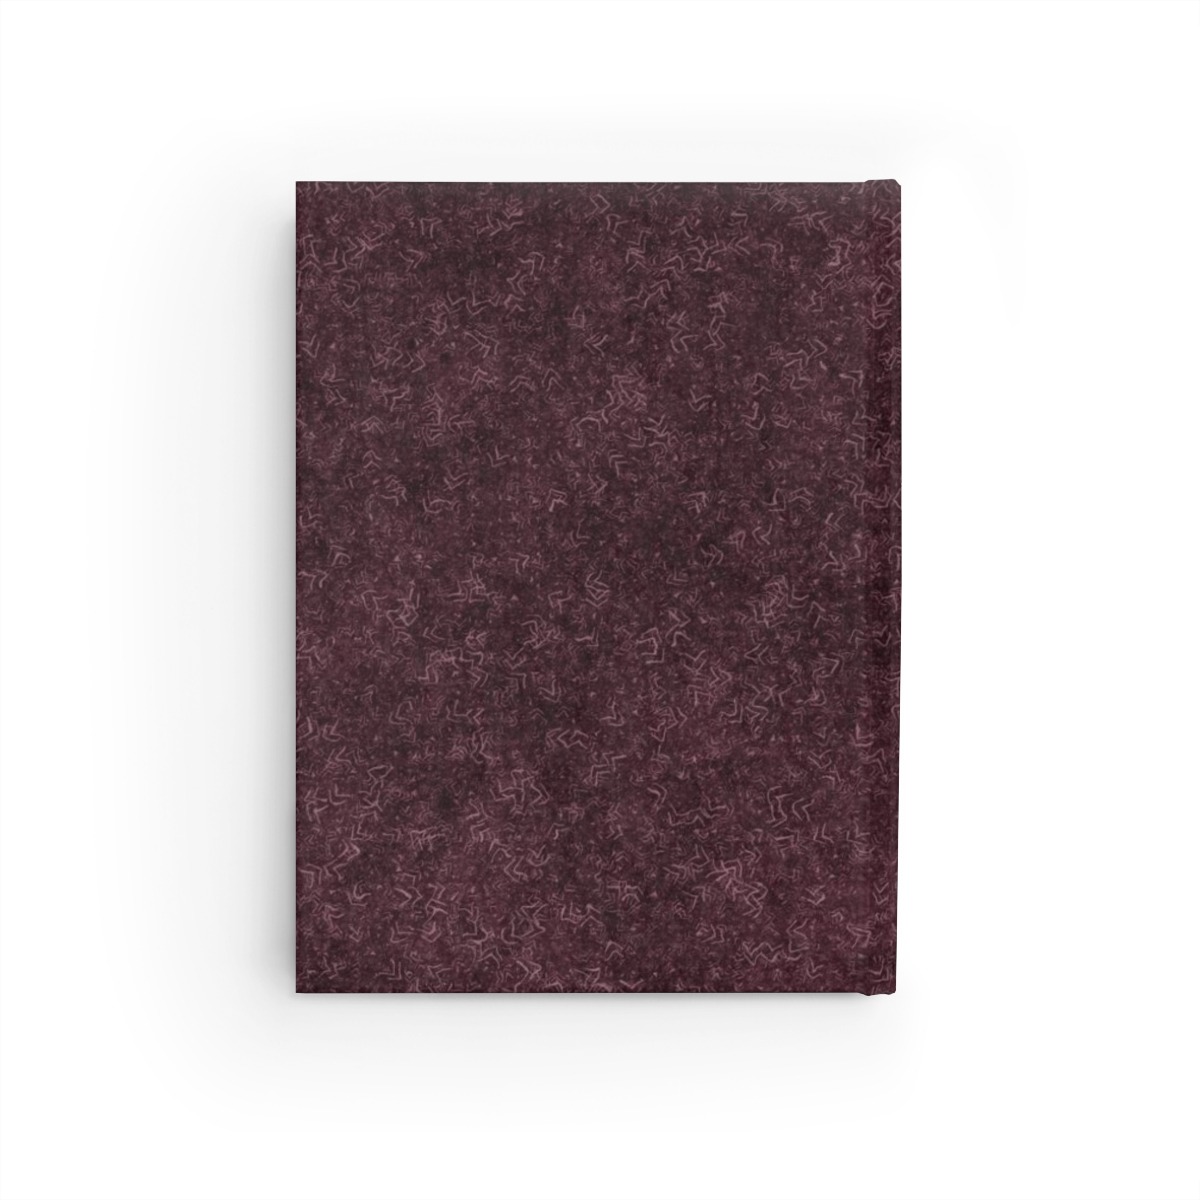 Maroon Raven Crescent Moon Journal – Ruled Line